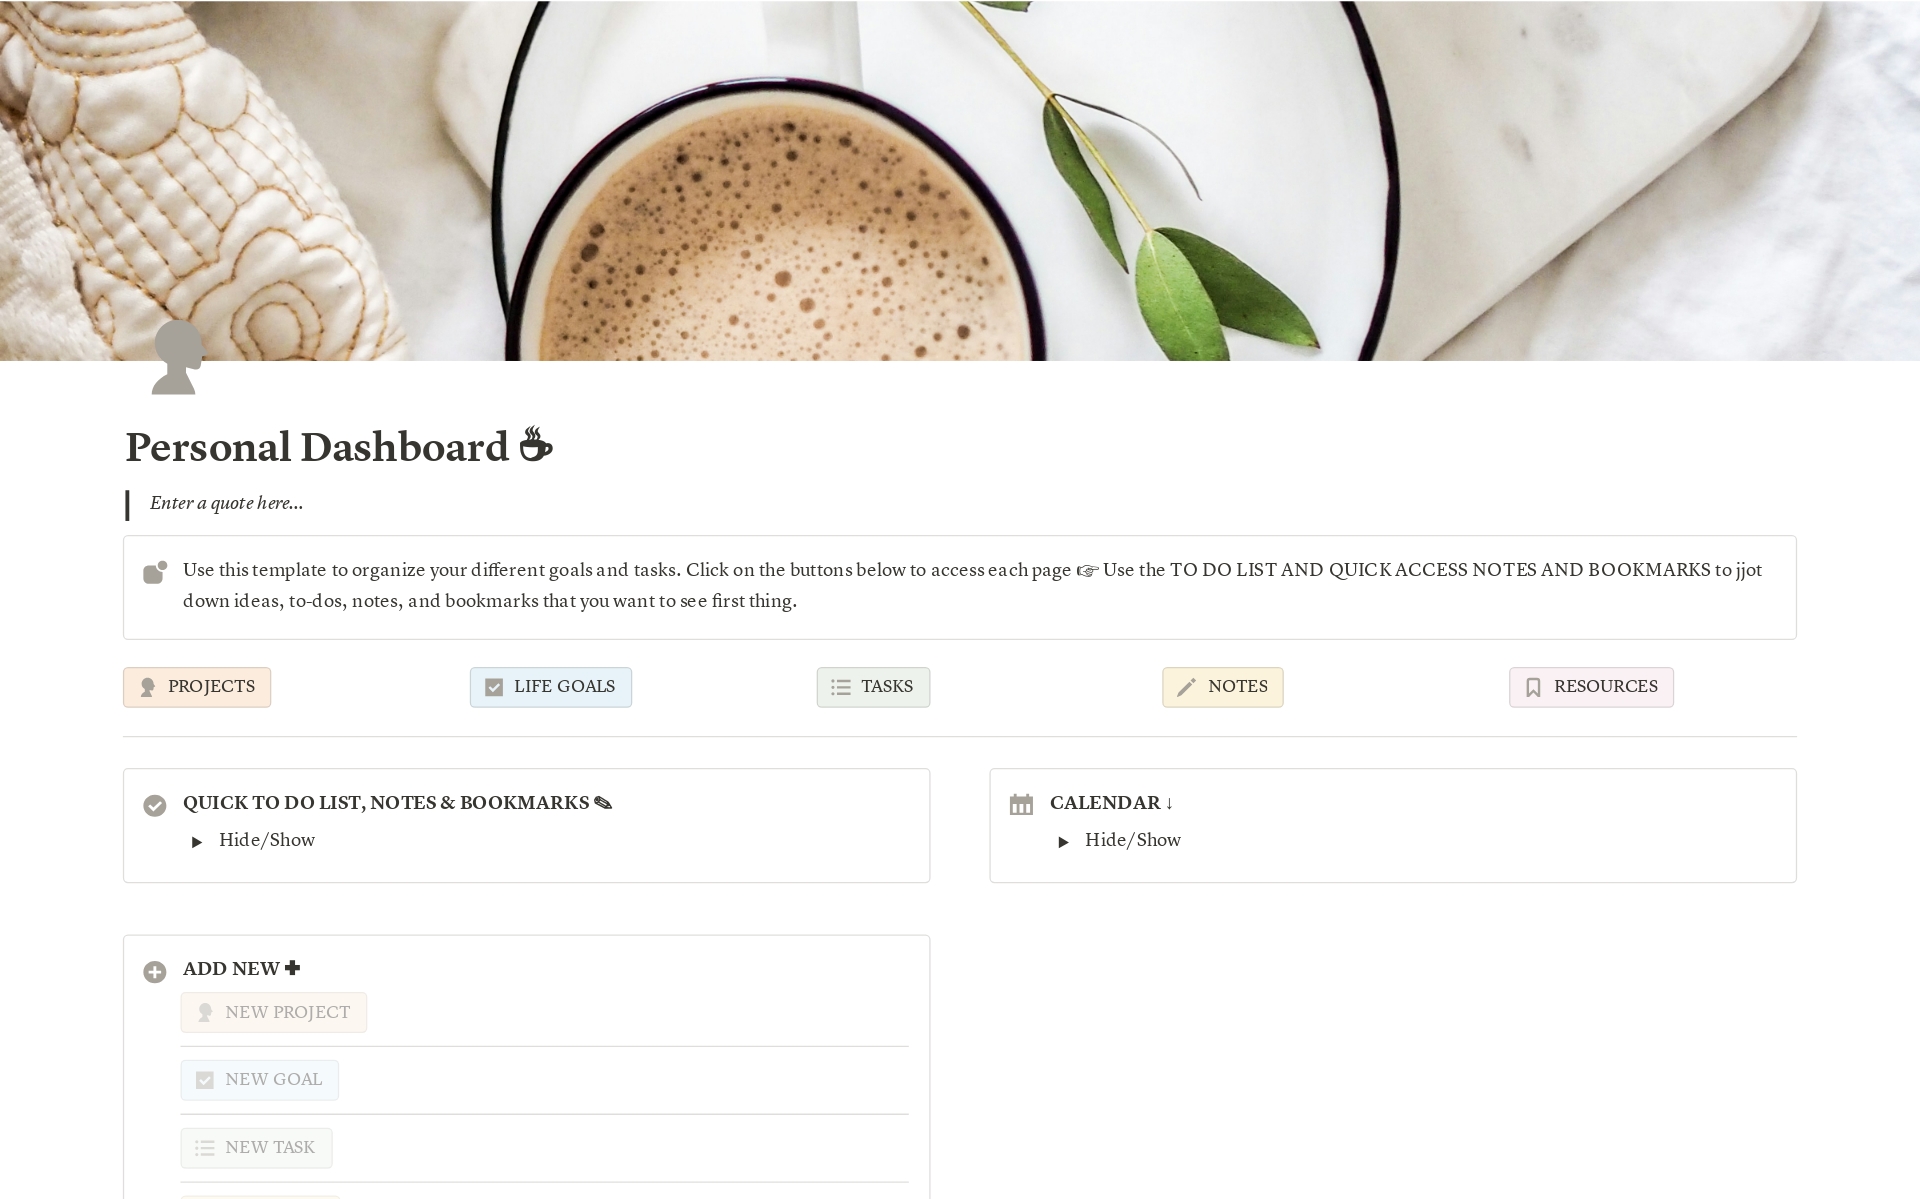 This personal dashboard is perfect for anyone in need of an easy to use homepage where you can access your goals, notes, tasks, and more while utilizing functional buttons and databases.